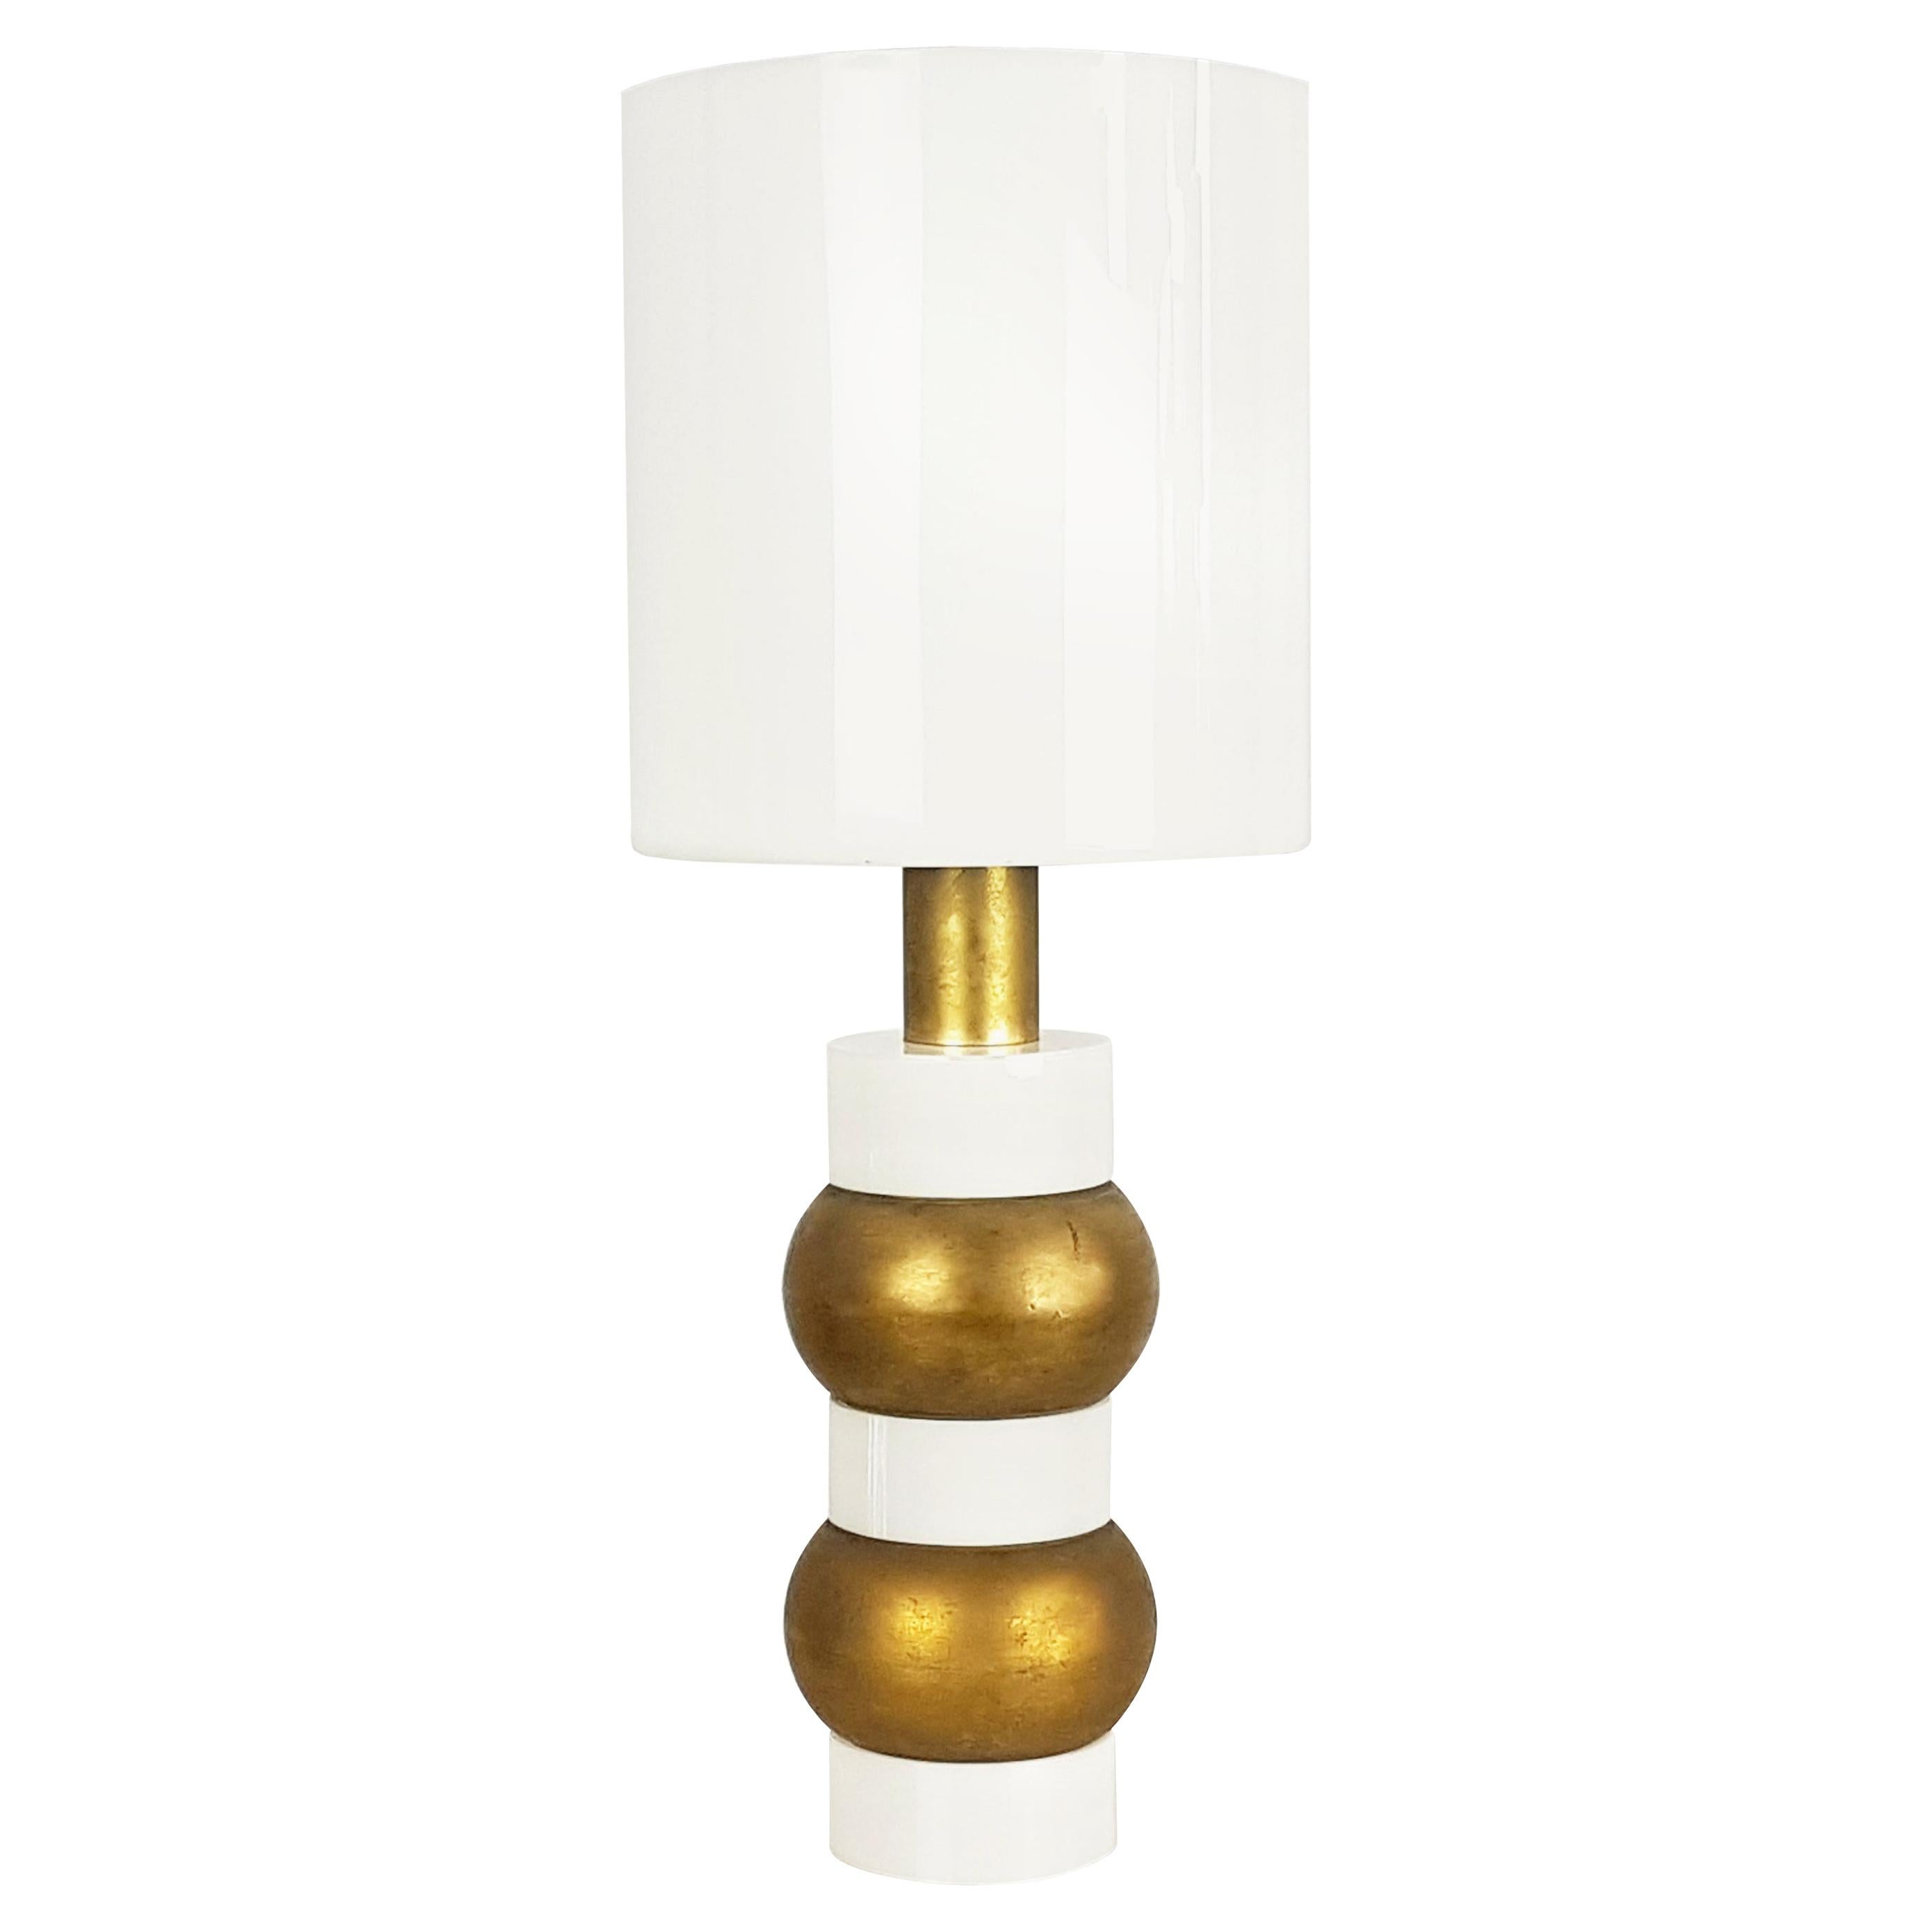 Italian White Perspex and Golden Metal 1960s Table Lamp with Cylindrical Shade